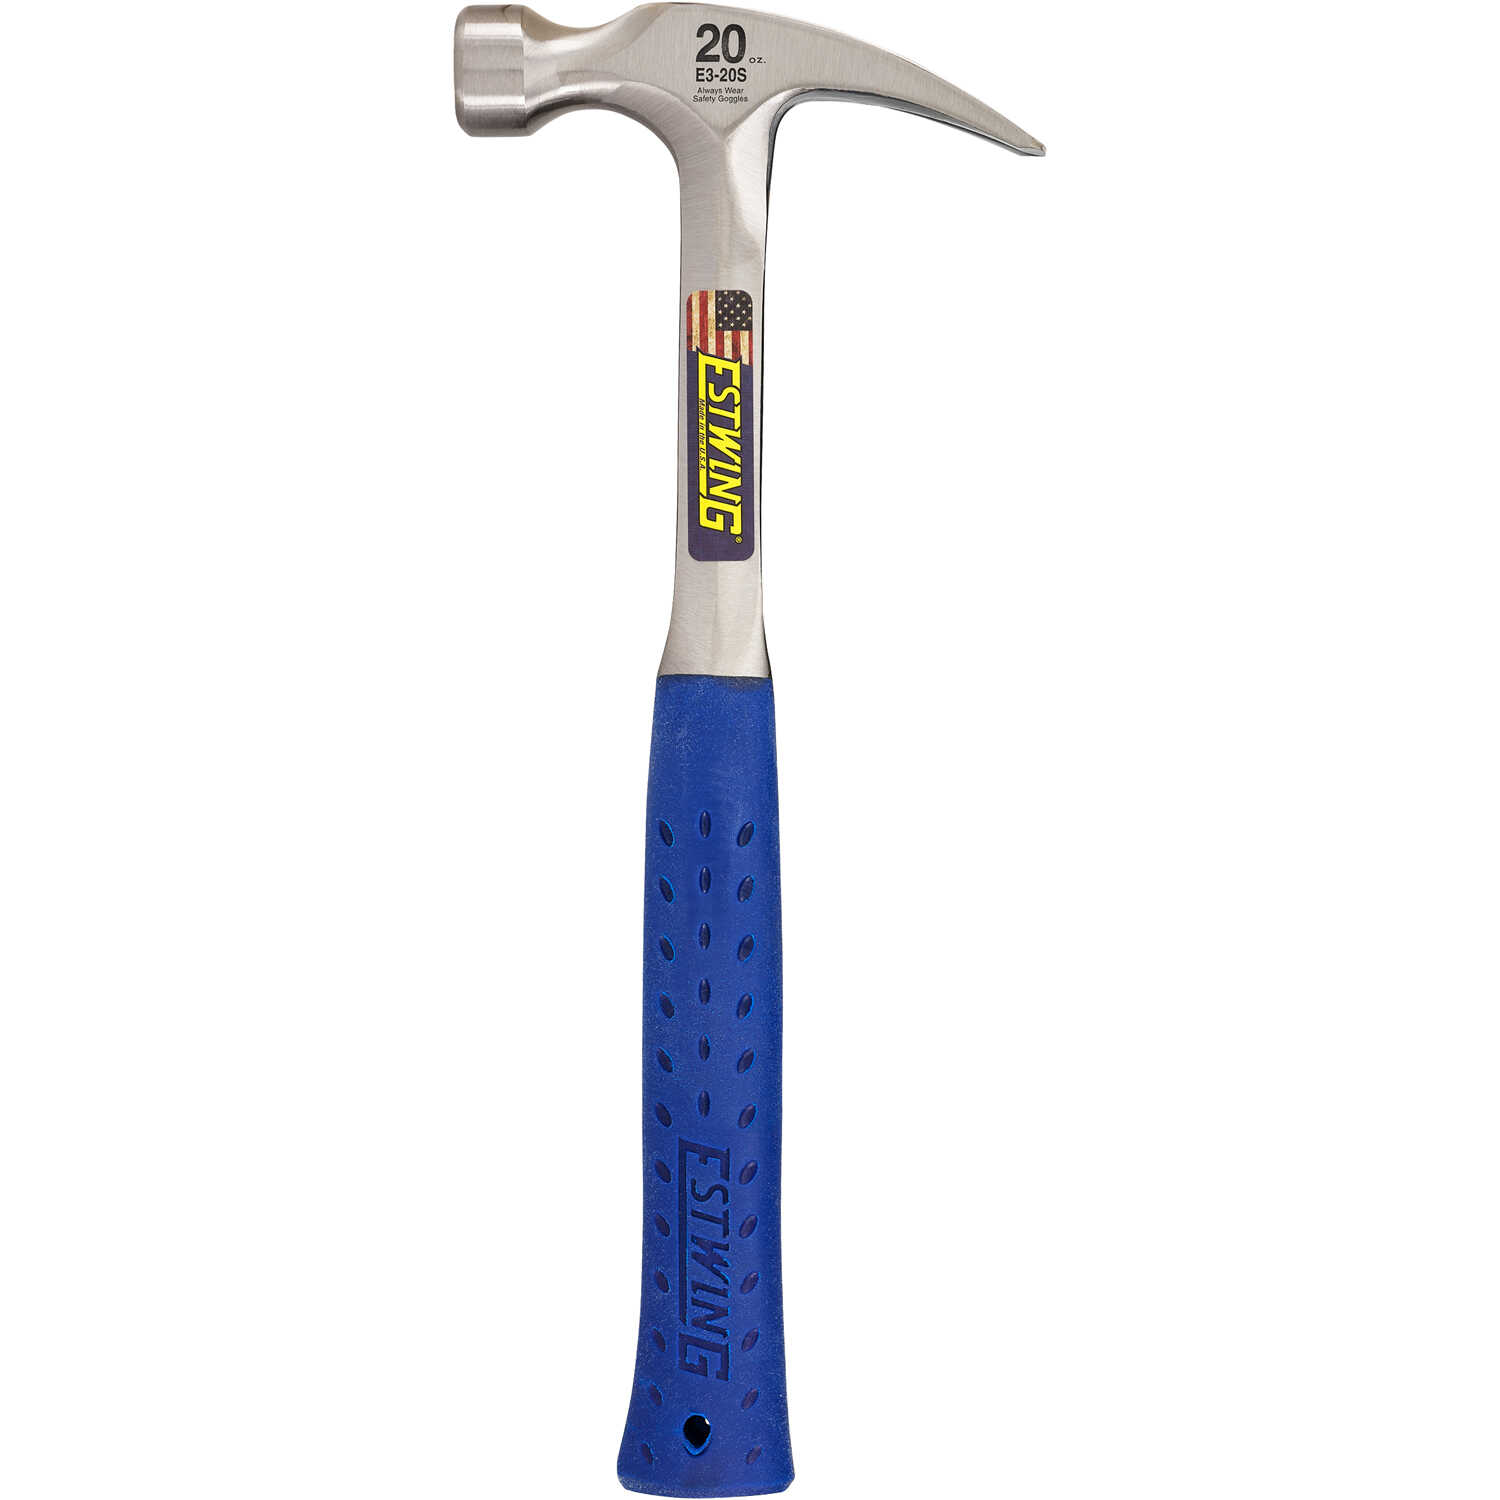 ESTWING Curved-Claw Rip Hammer 16 oz Solid Steel Forged Metal Head 